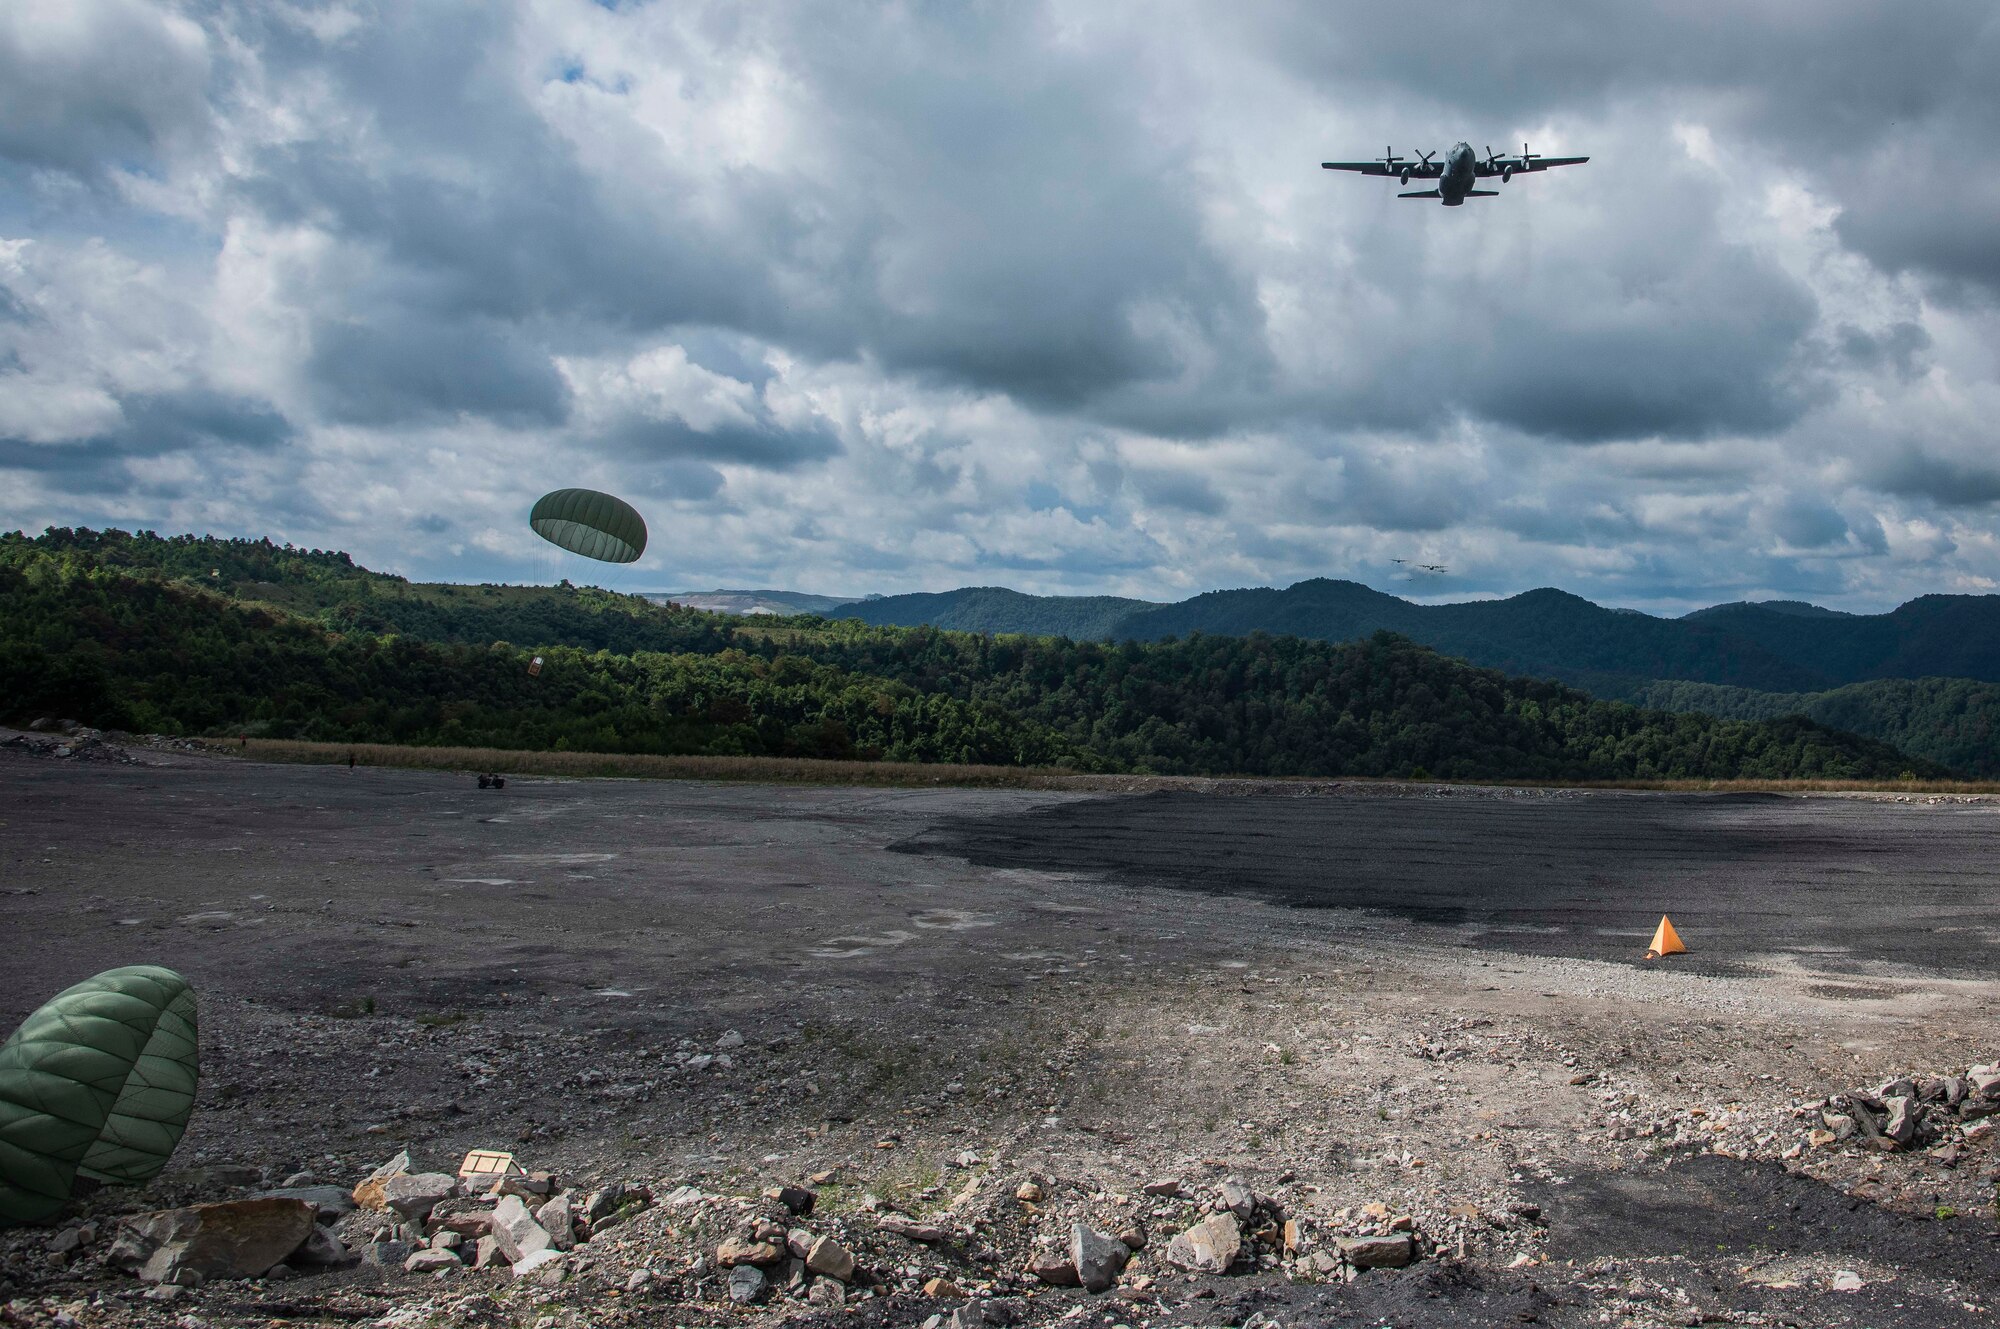 Cargo parachutes toward the drop zone as a C-130 aircraft performs an airdrop near Charleston, W. Va., Aug. 24, 2020. Eight C-130s from Reserve and Guard partners participate in a week-long training event. The scenario was designed to test the abilities of Air Force Reserve units to execute rapid global mobility missions in challenging, contested scenarios. (U.S. Air Force Reserve photo by Senior Airman Nathan Byrnes)